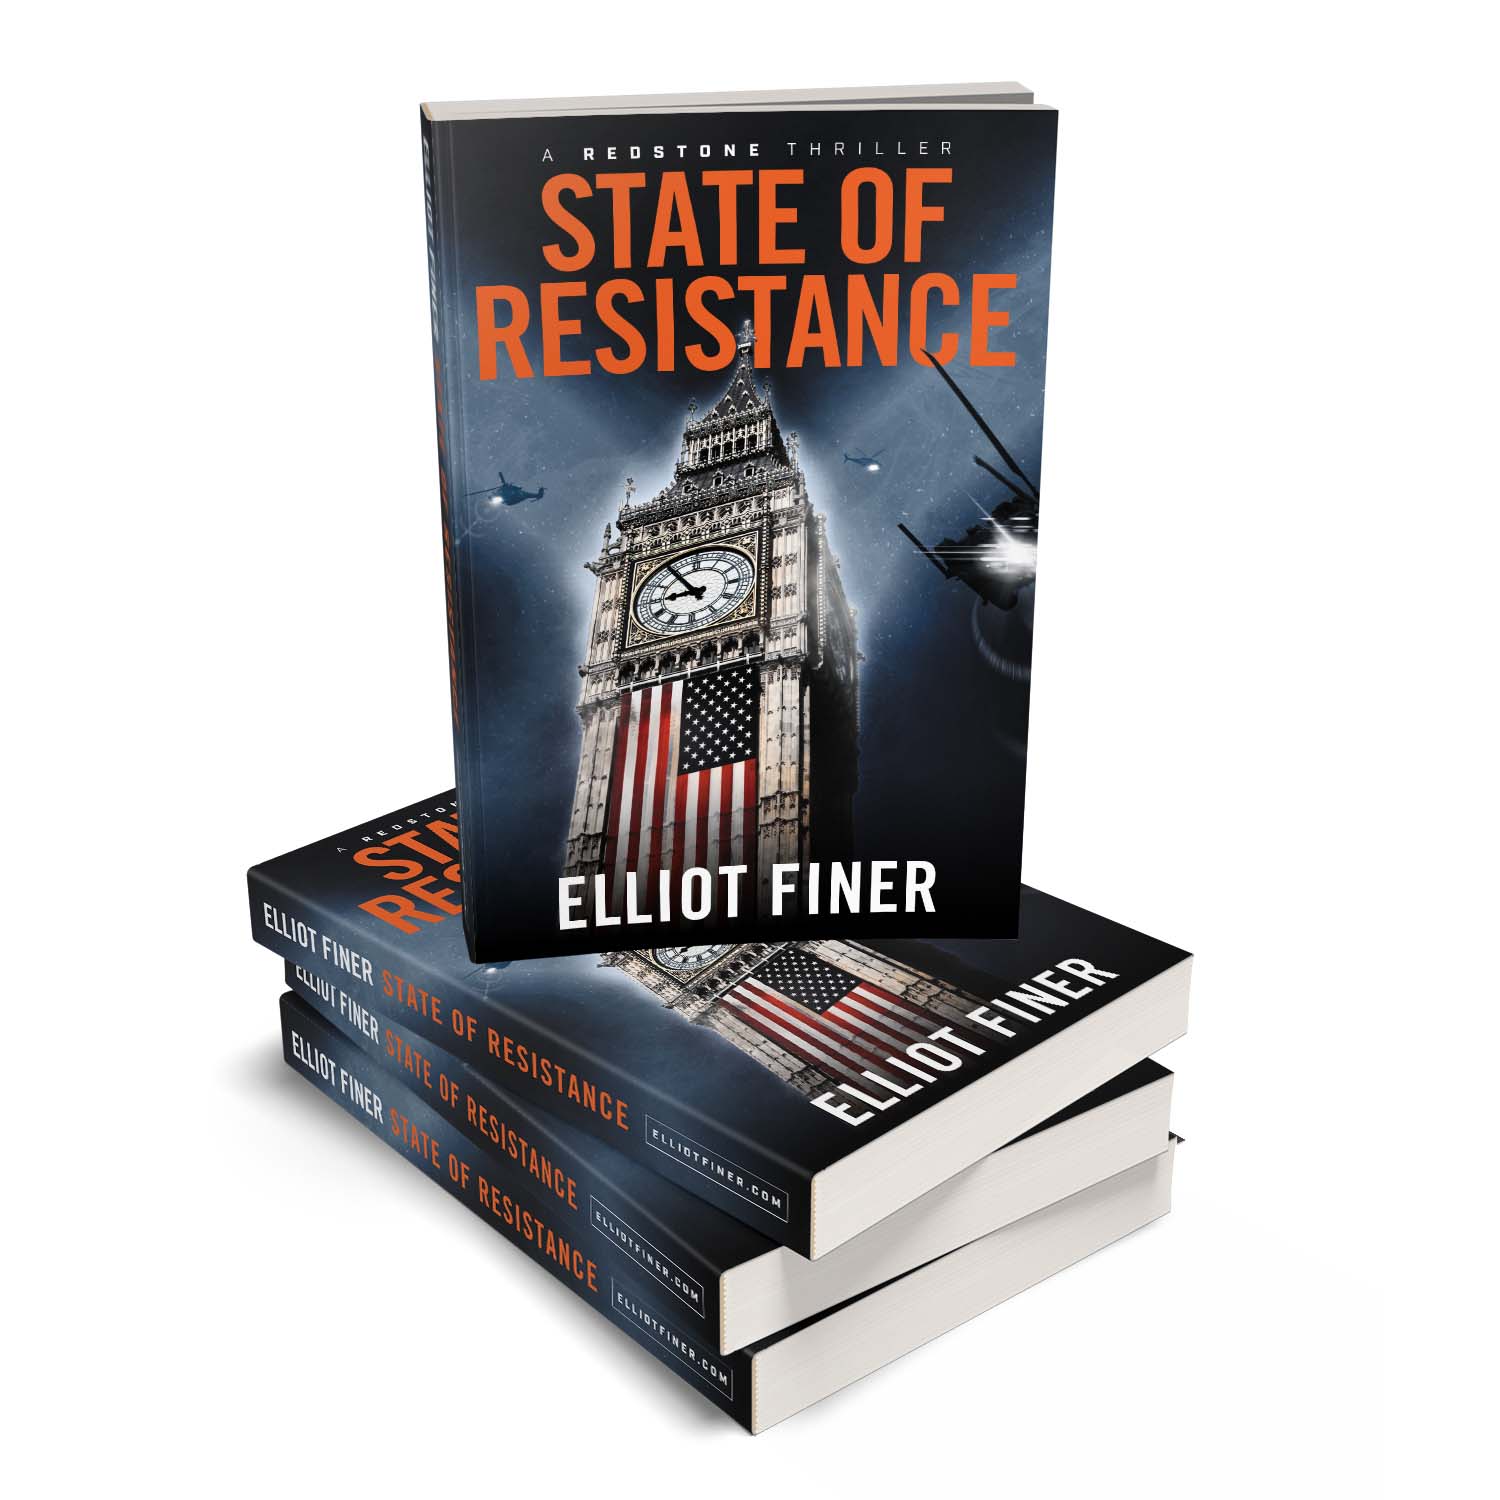 'State of Resistance' is a twisting near-future conspiracy thriller. The author is Elliot Finer. The book cover was designed by Mark Thomas of coverness.com. To find out more about my book design services, please visit www.coverness.com